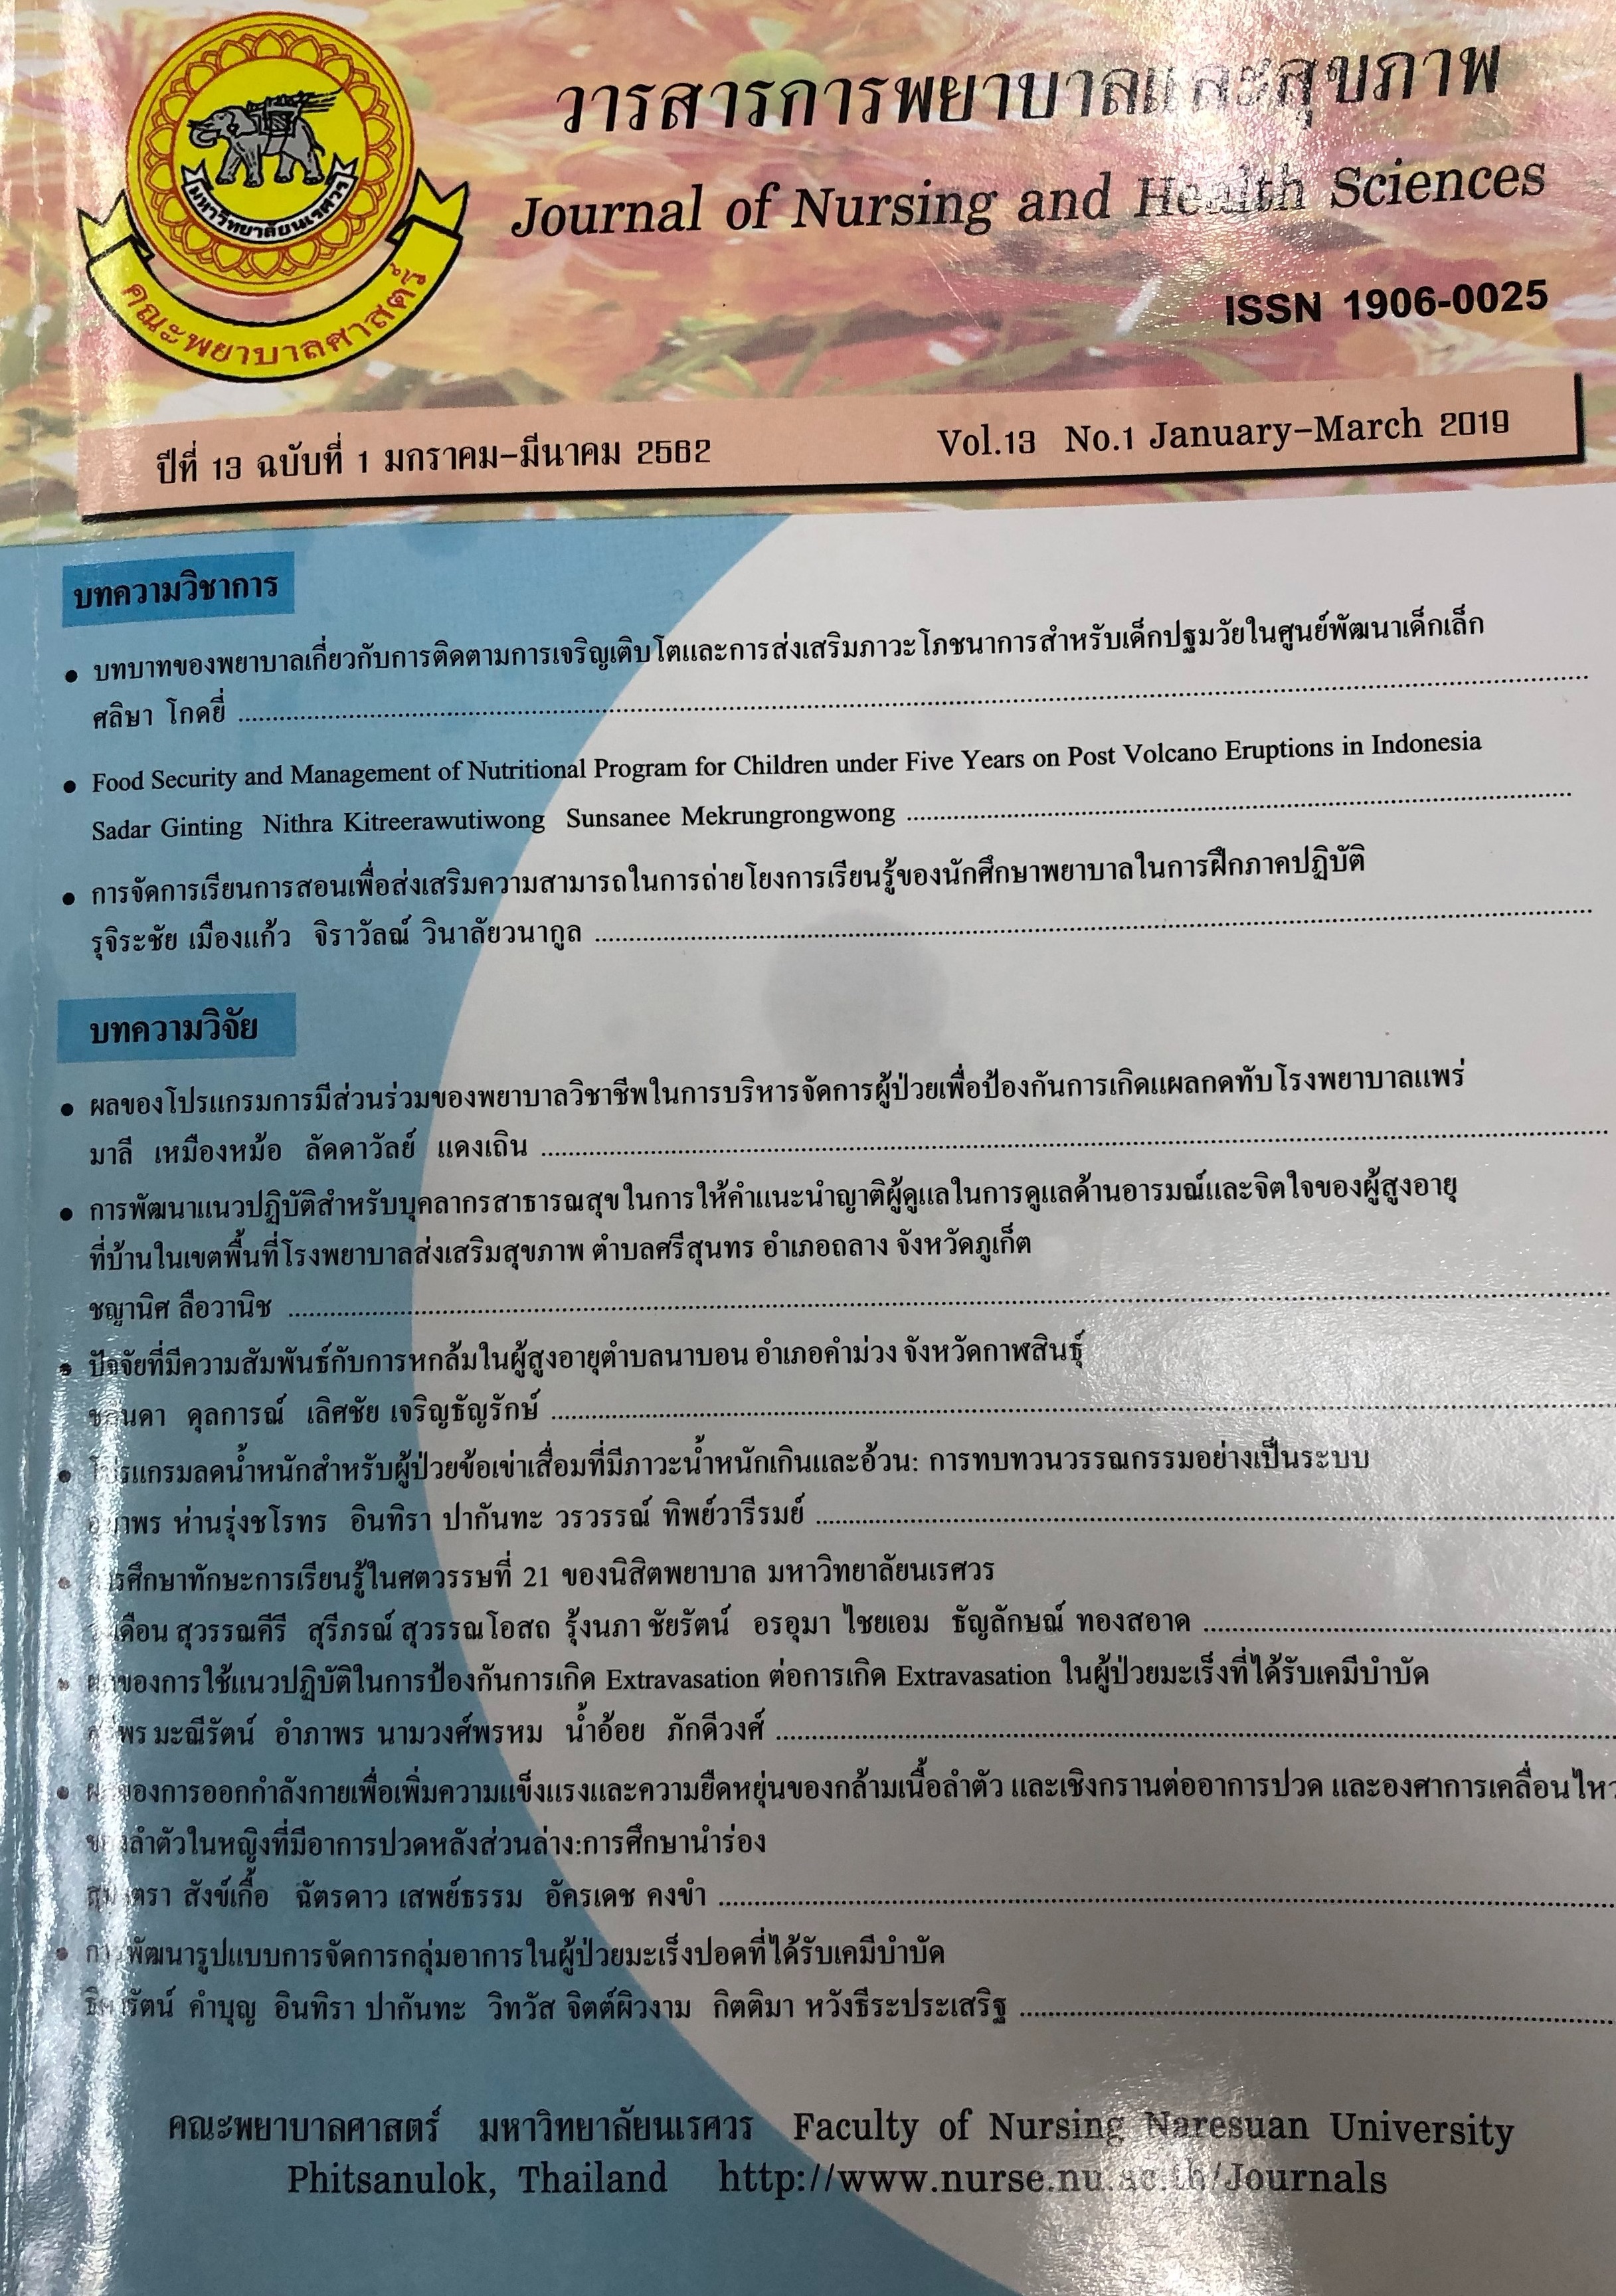 					View Vol. 13 No. 1 (2019): Journal of Nursing and Health Sciences
				